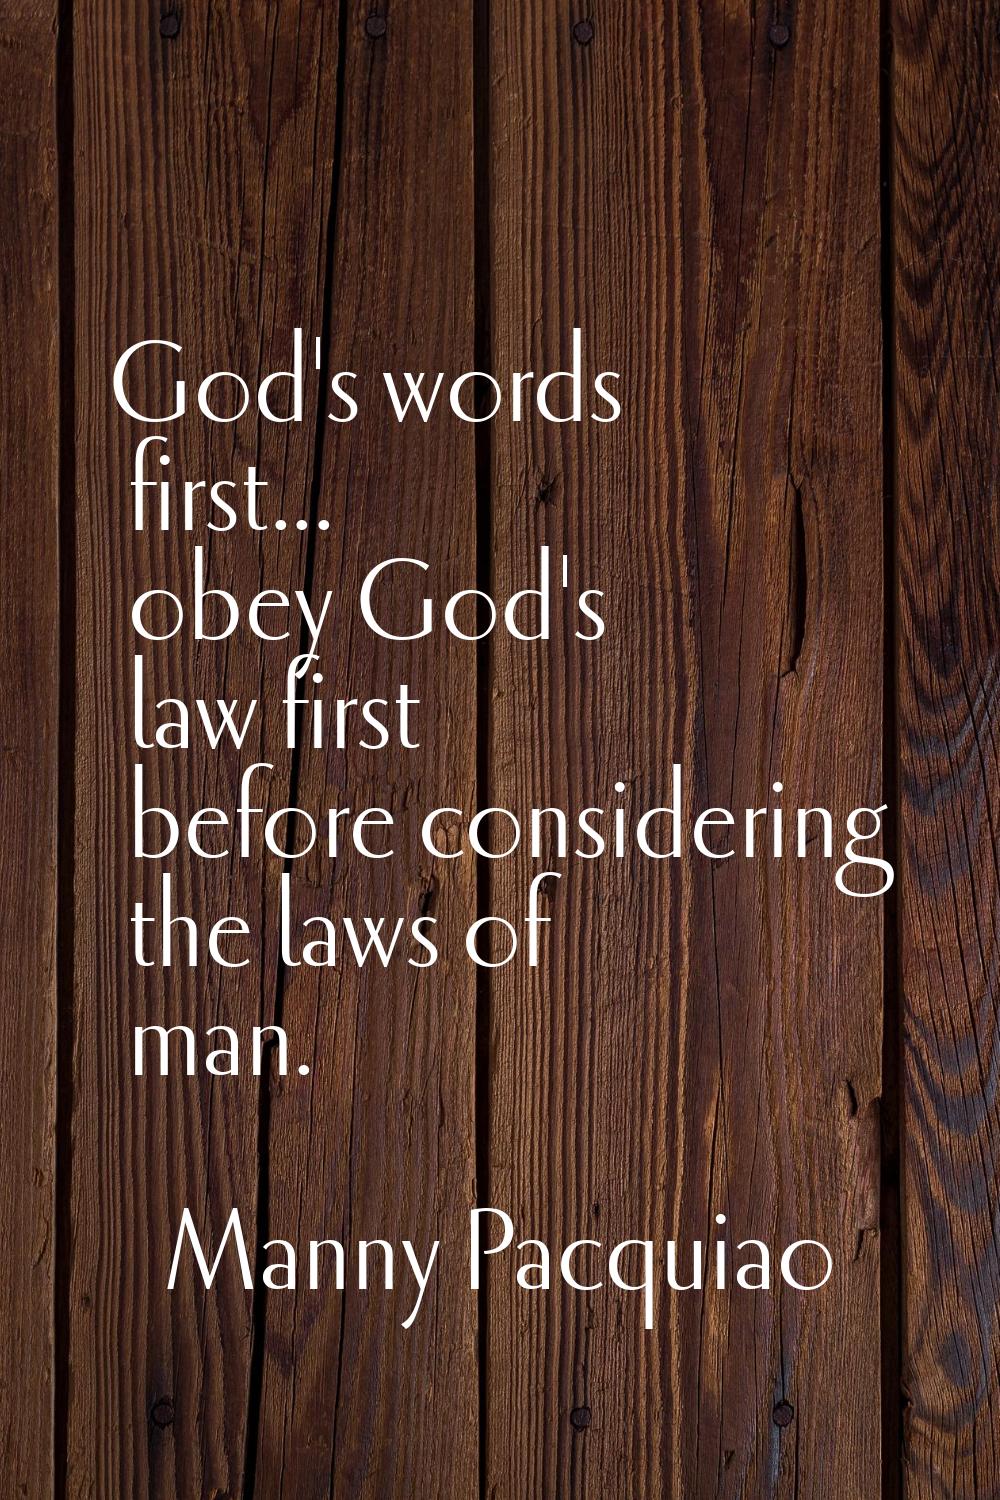 God's words first... obey God's law first before considering the laws of man.